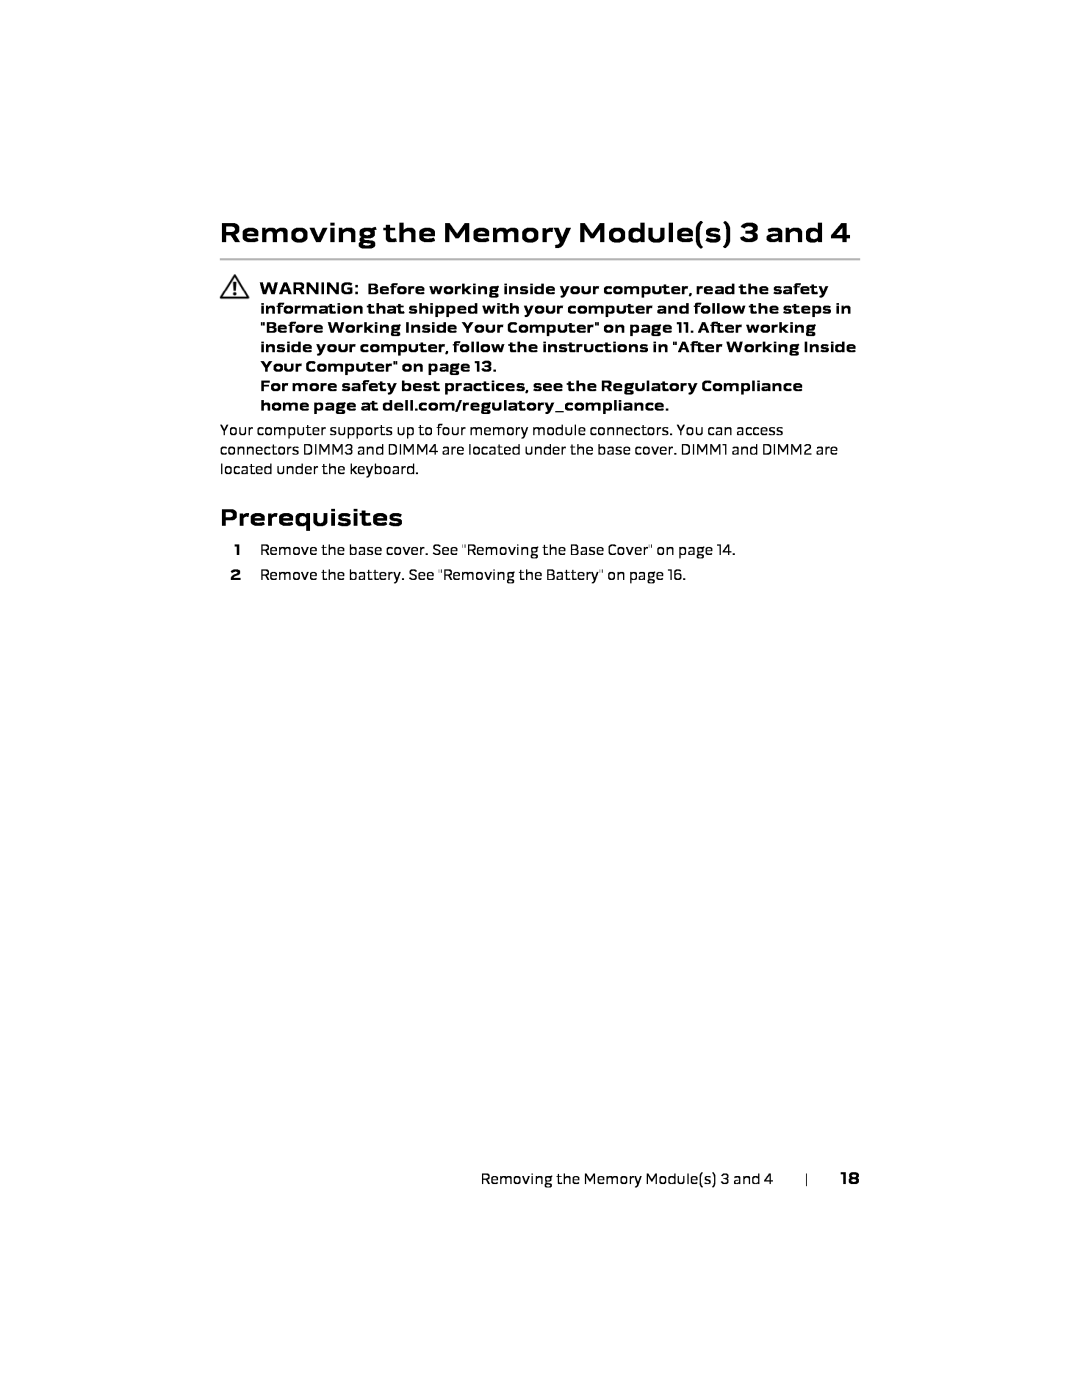 Alienware P18E, 17 R1 owner manual Removing the Memory Modules 3 and, Prerequisites 